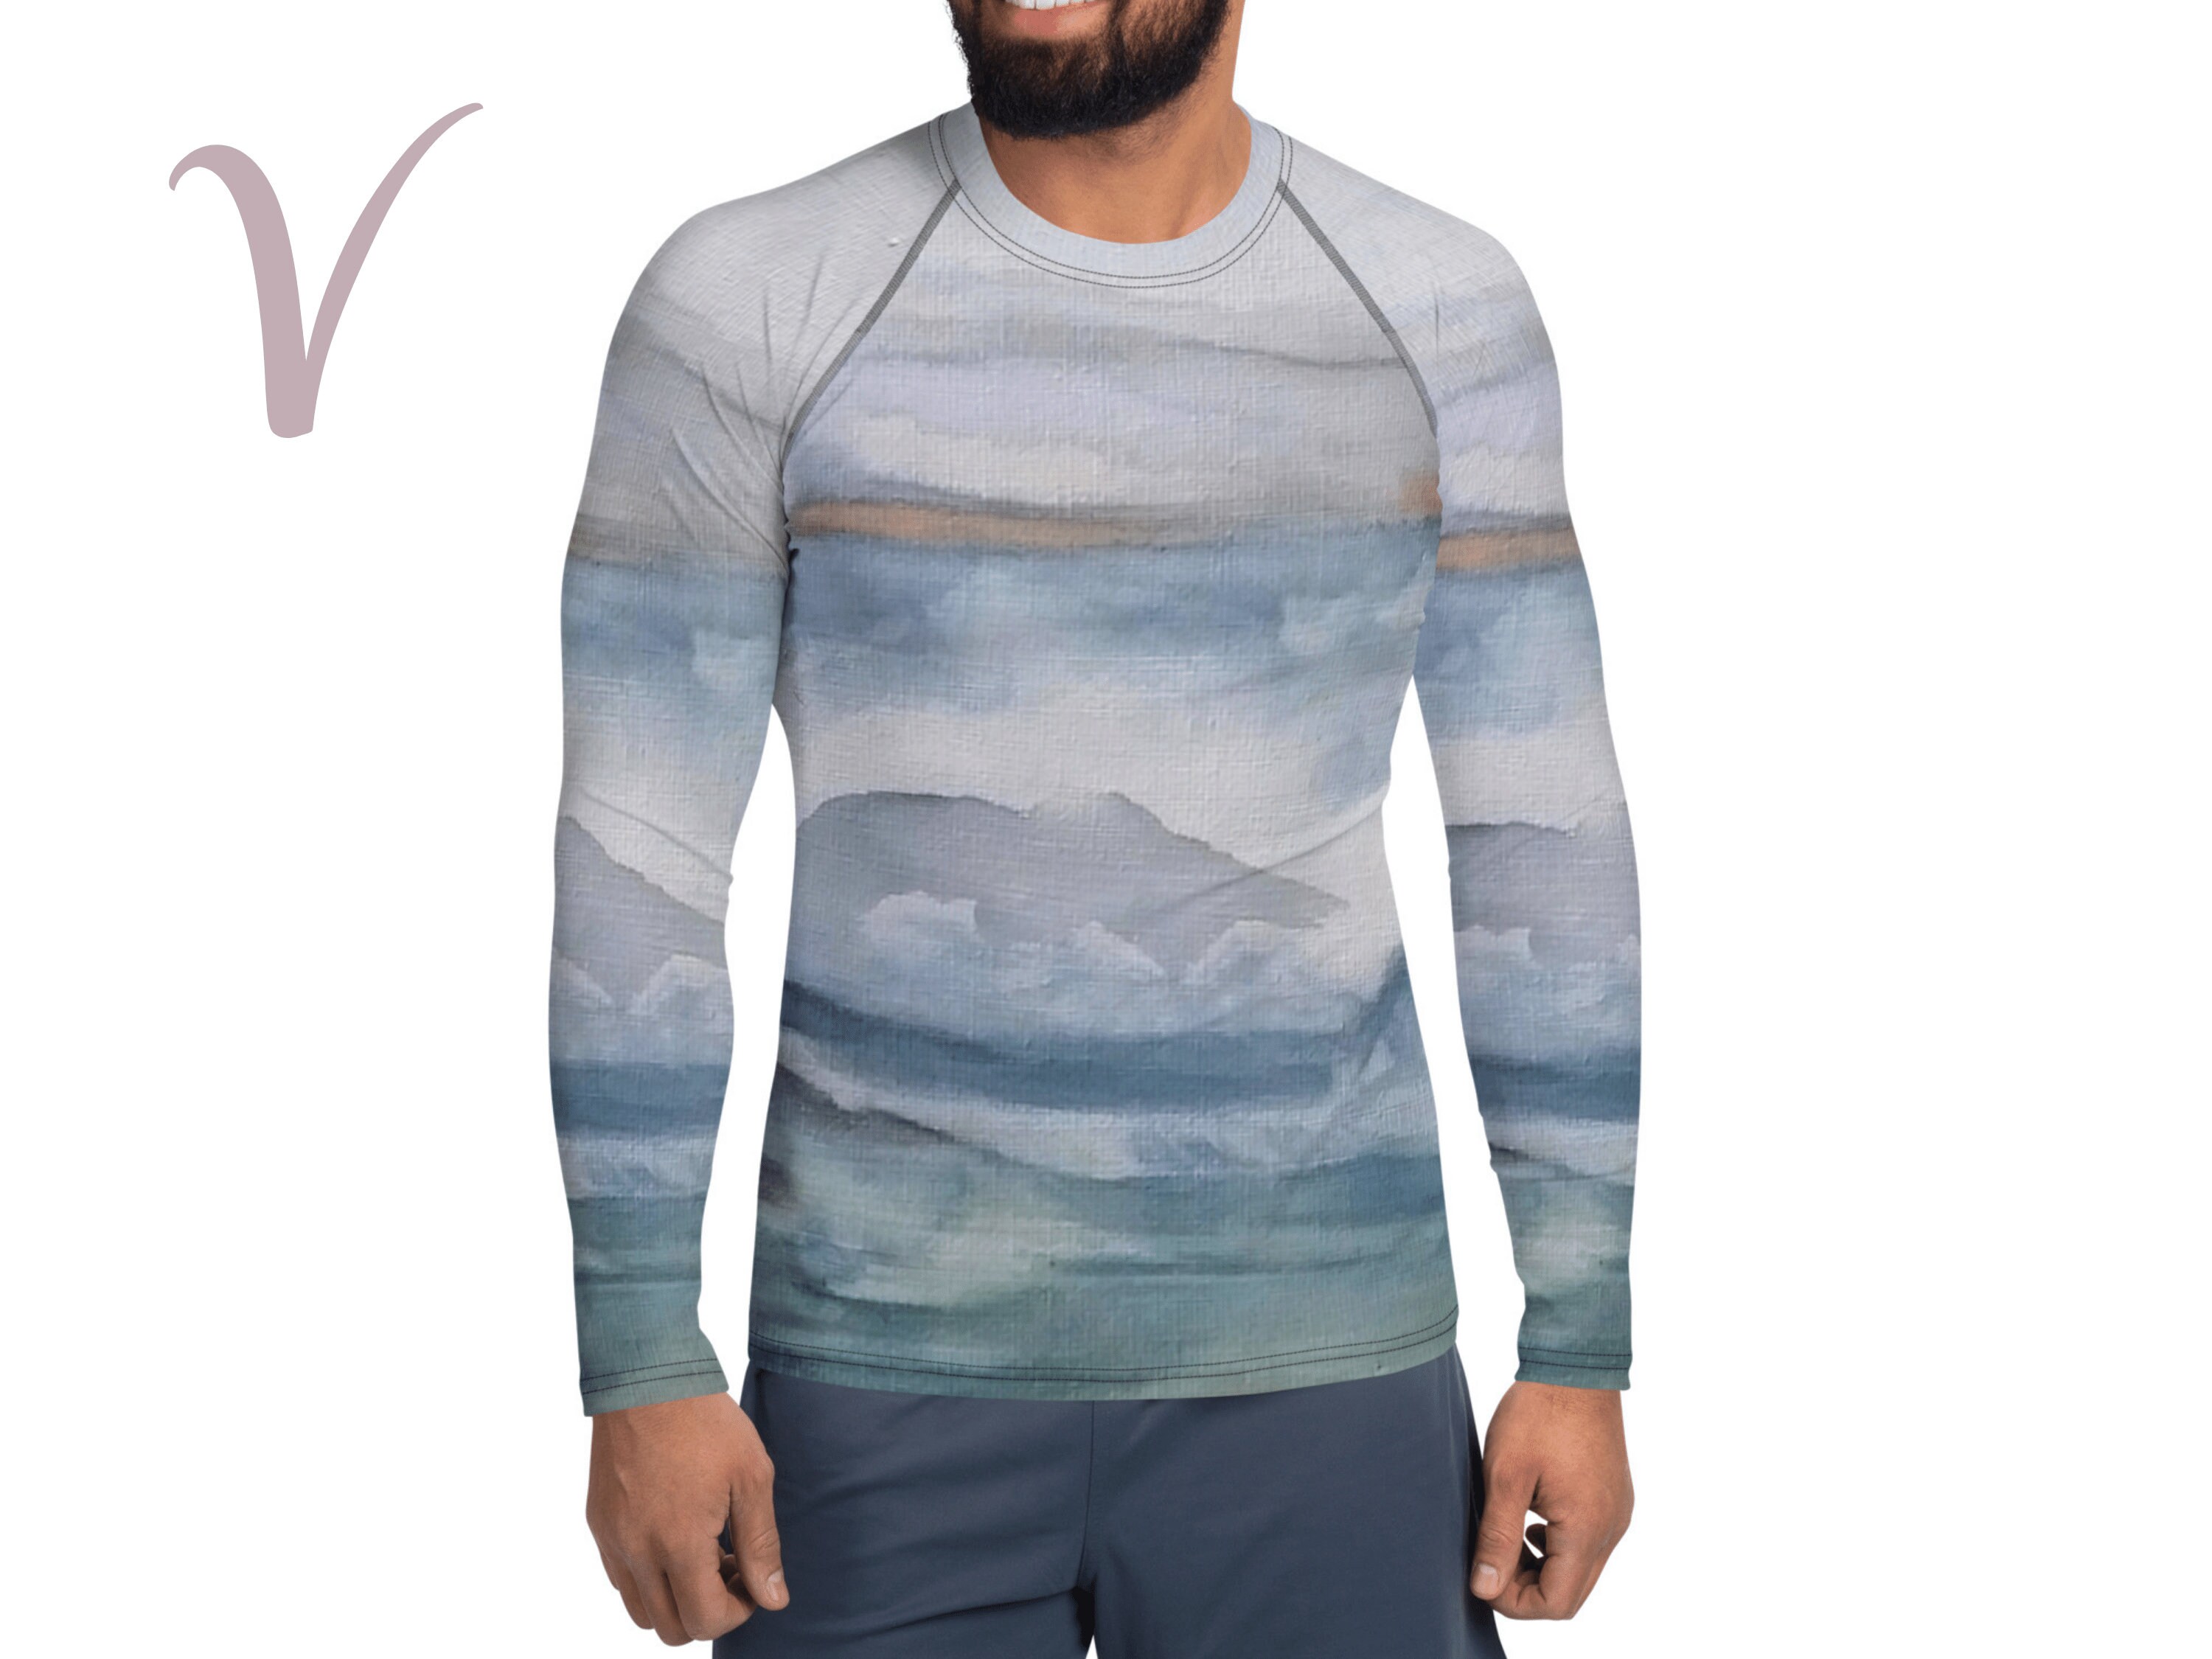 Pacific Waves Goodbye 3 All-over Print Tshirt, Men's Long Sleeve